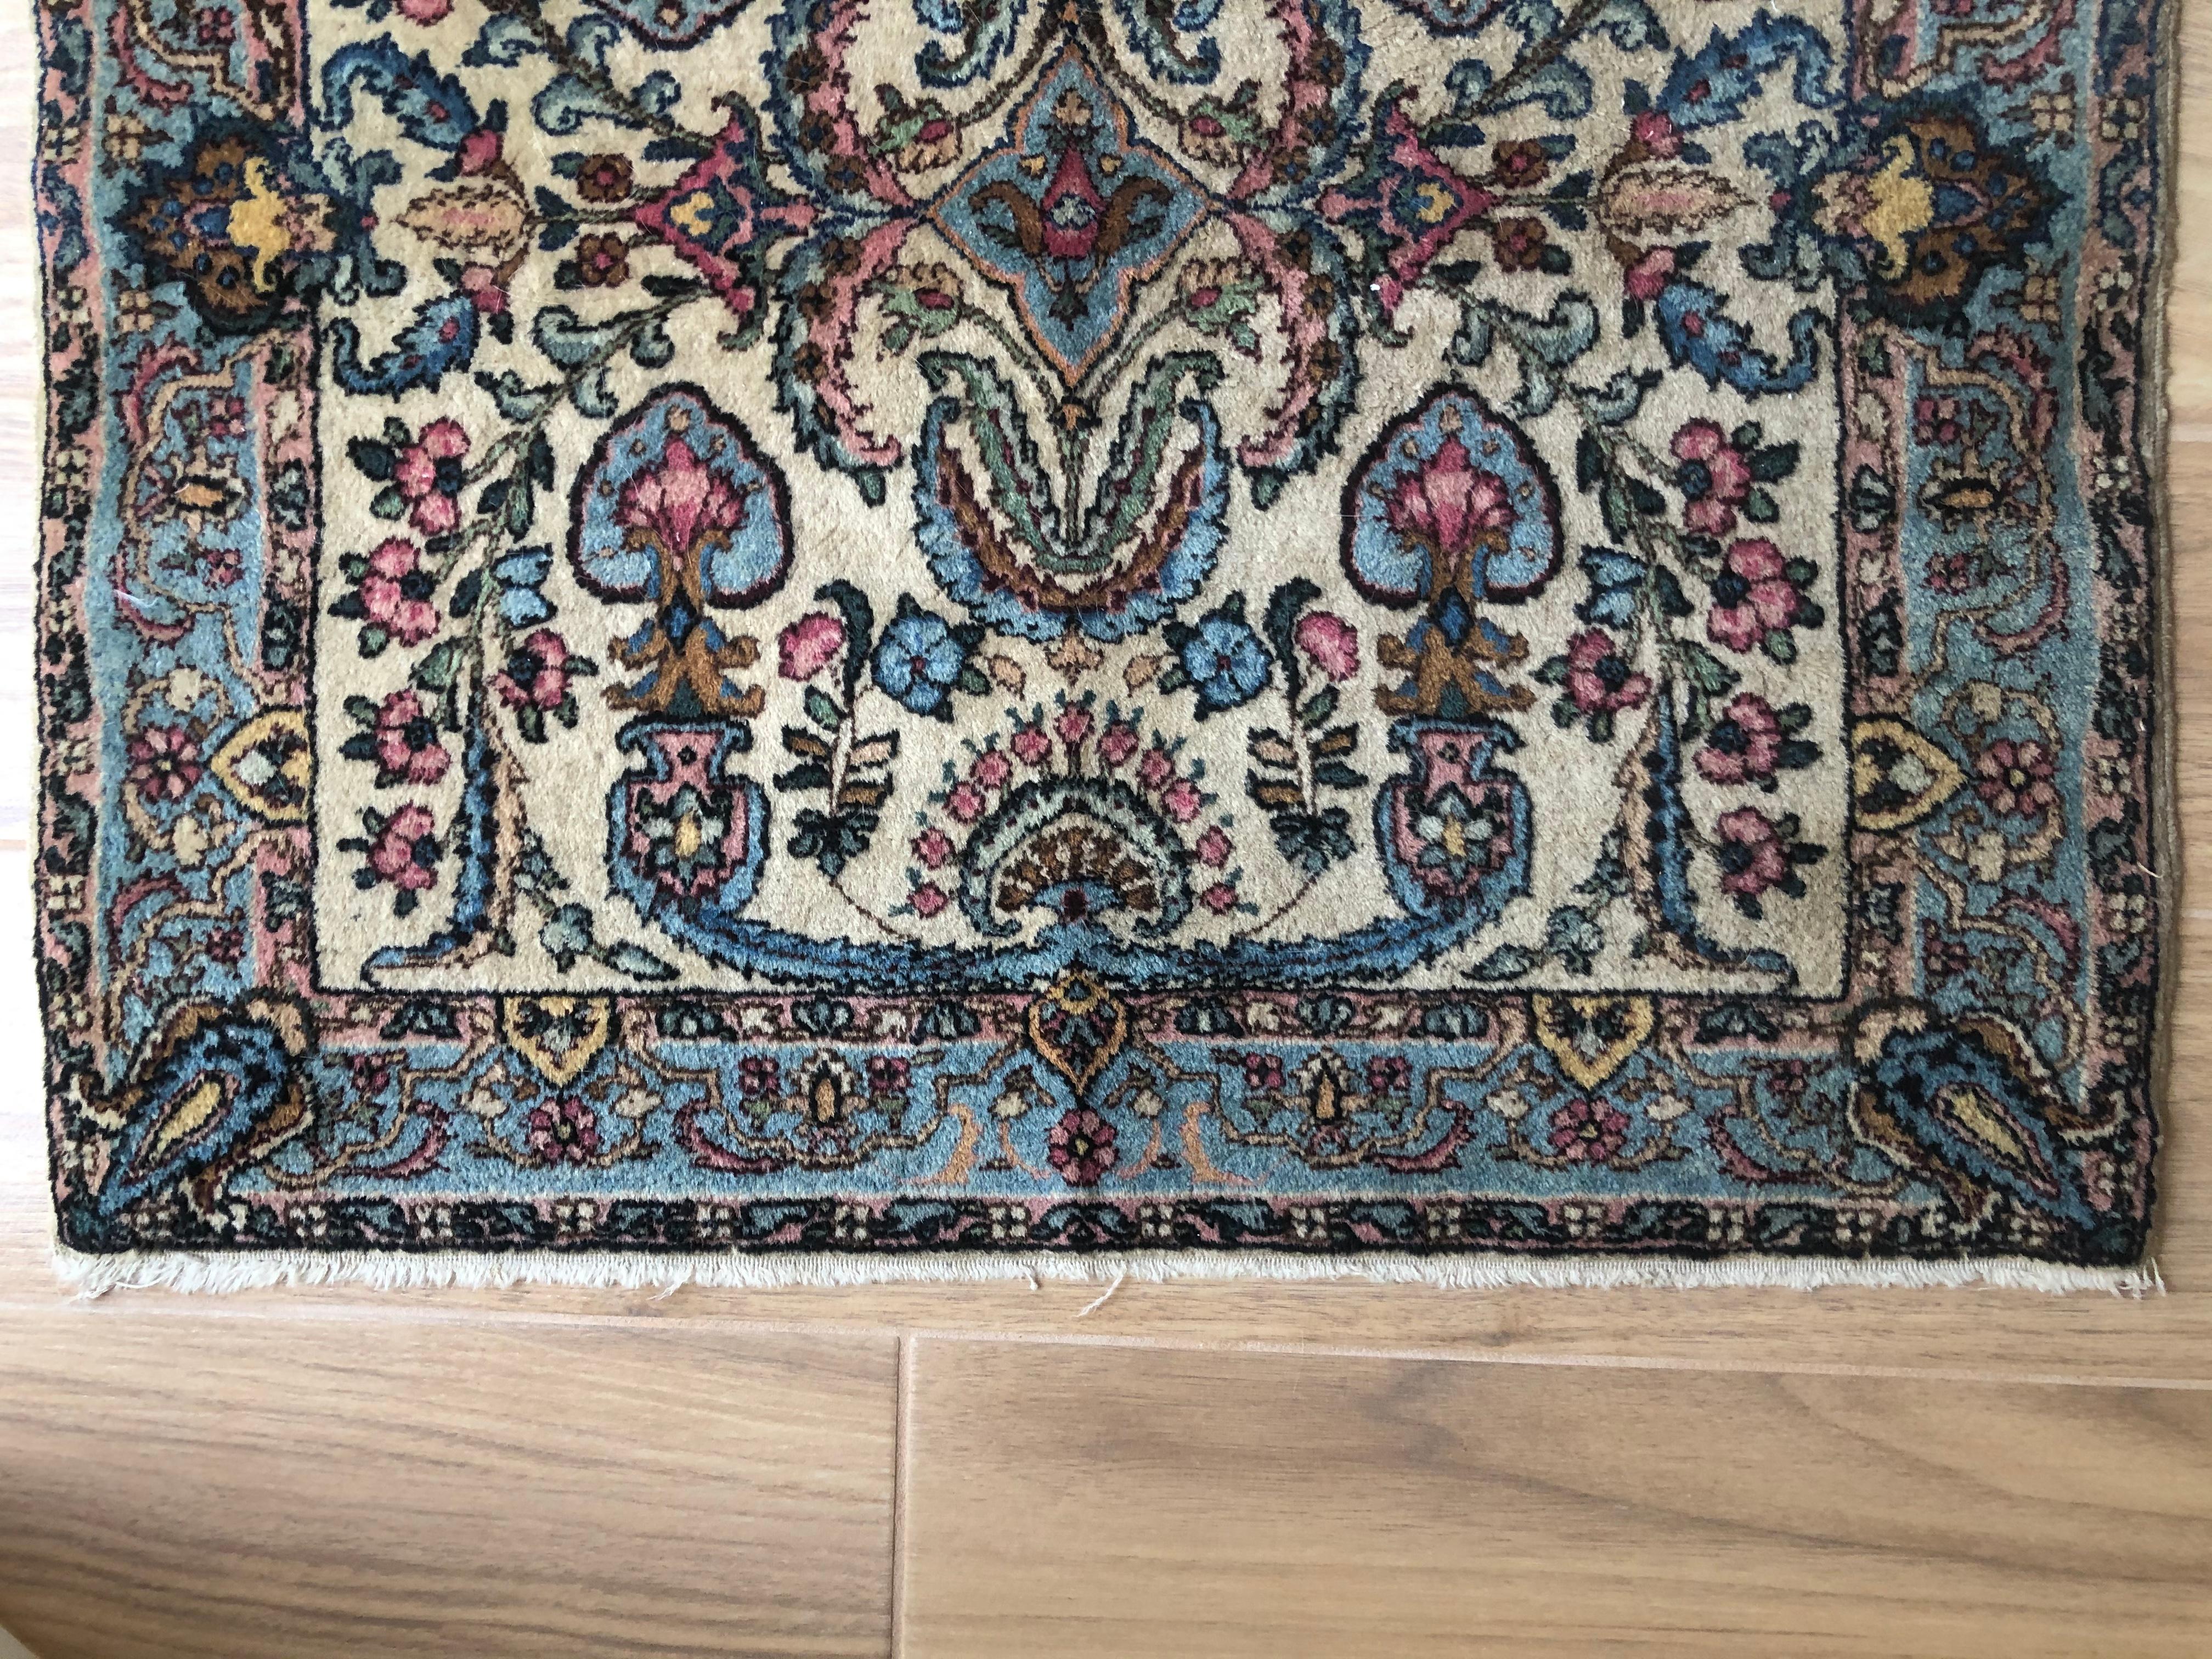 Beautiful rare handwoven fine wool square Persian rug with cream and beige background and accents of light blue and pink hues of floral designs and vines. Perfect for entrance or under a small coffee table, or house entrance.